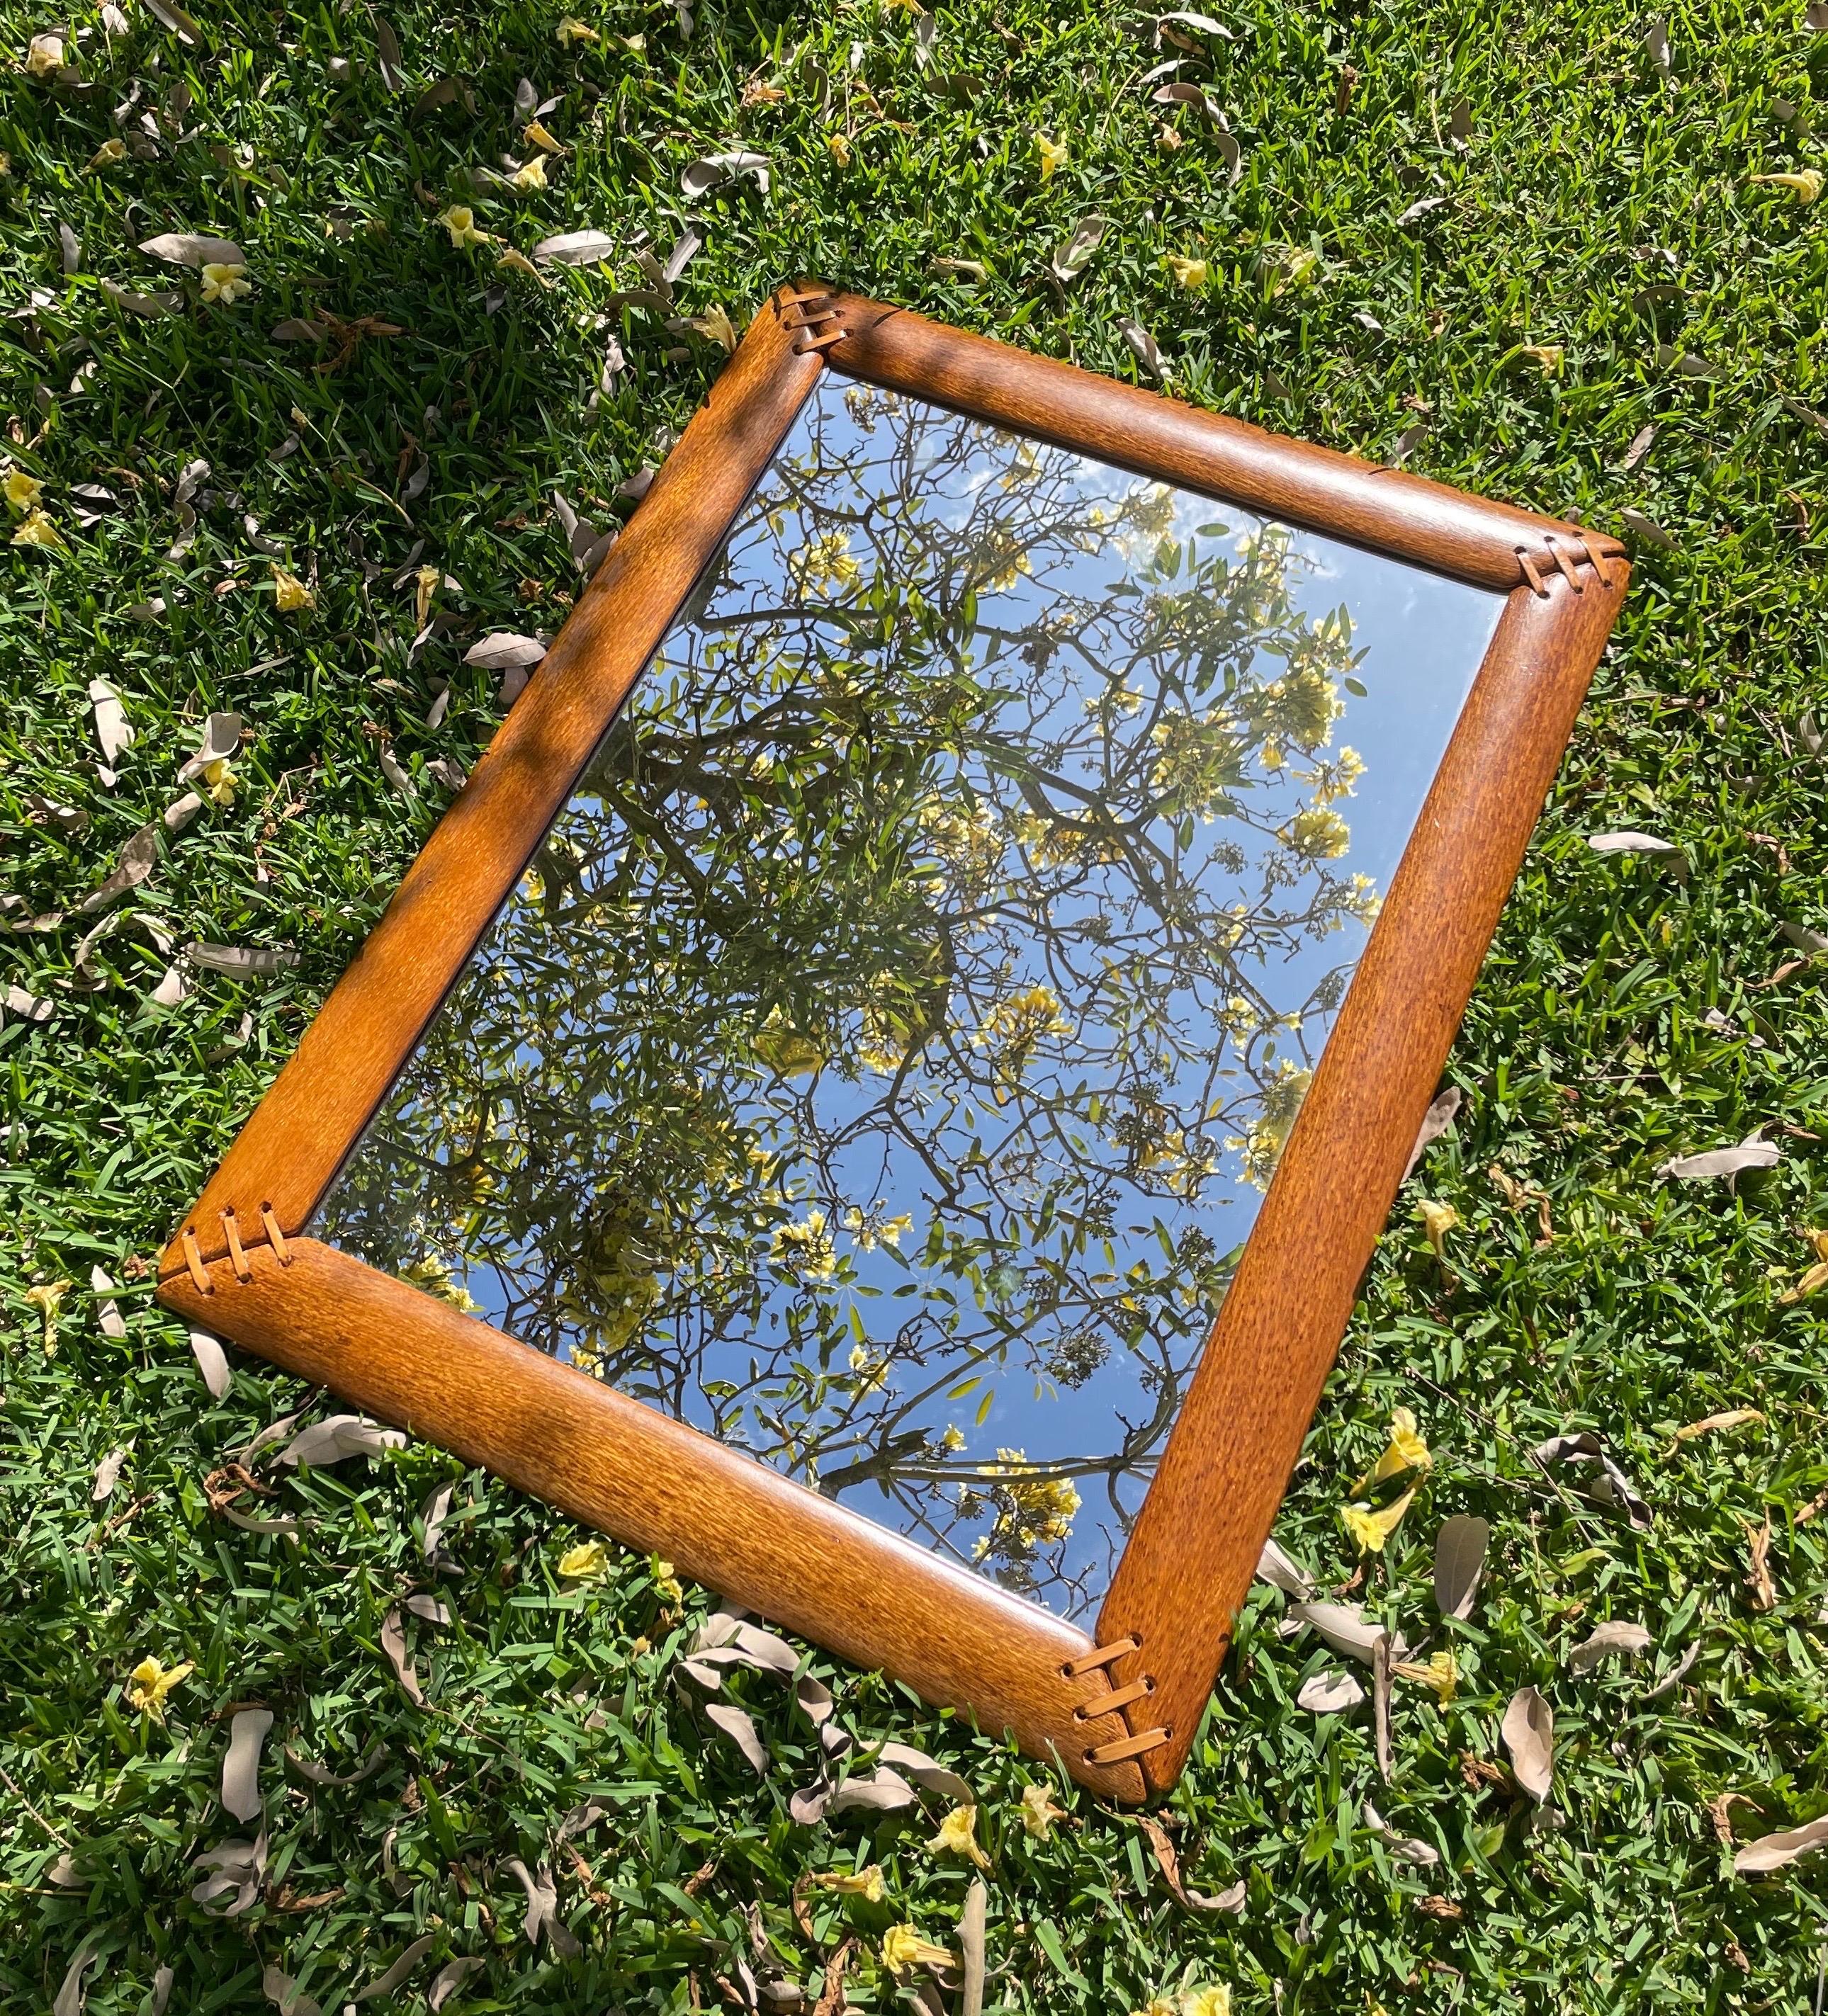 A palmwood and leather mirror by Pacific Green of Australia. Configured to hang vertically or horizontally.

Available for pick up in Kaneohe, HI (Oahu). Free delivery anywhere on the island is available for certain dates in November. 